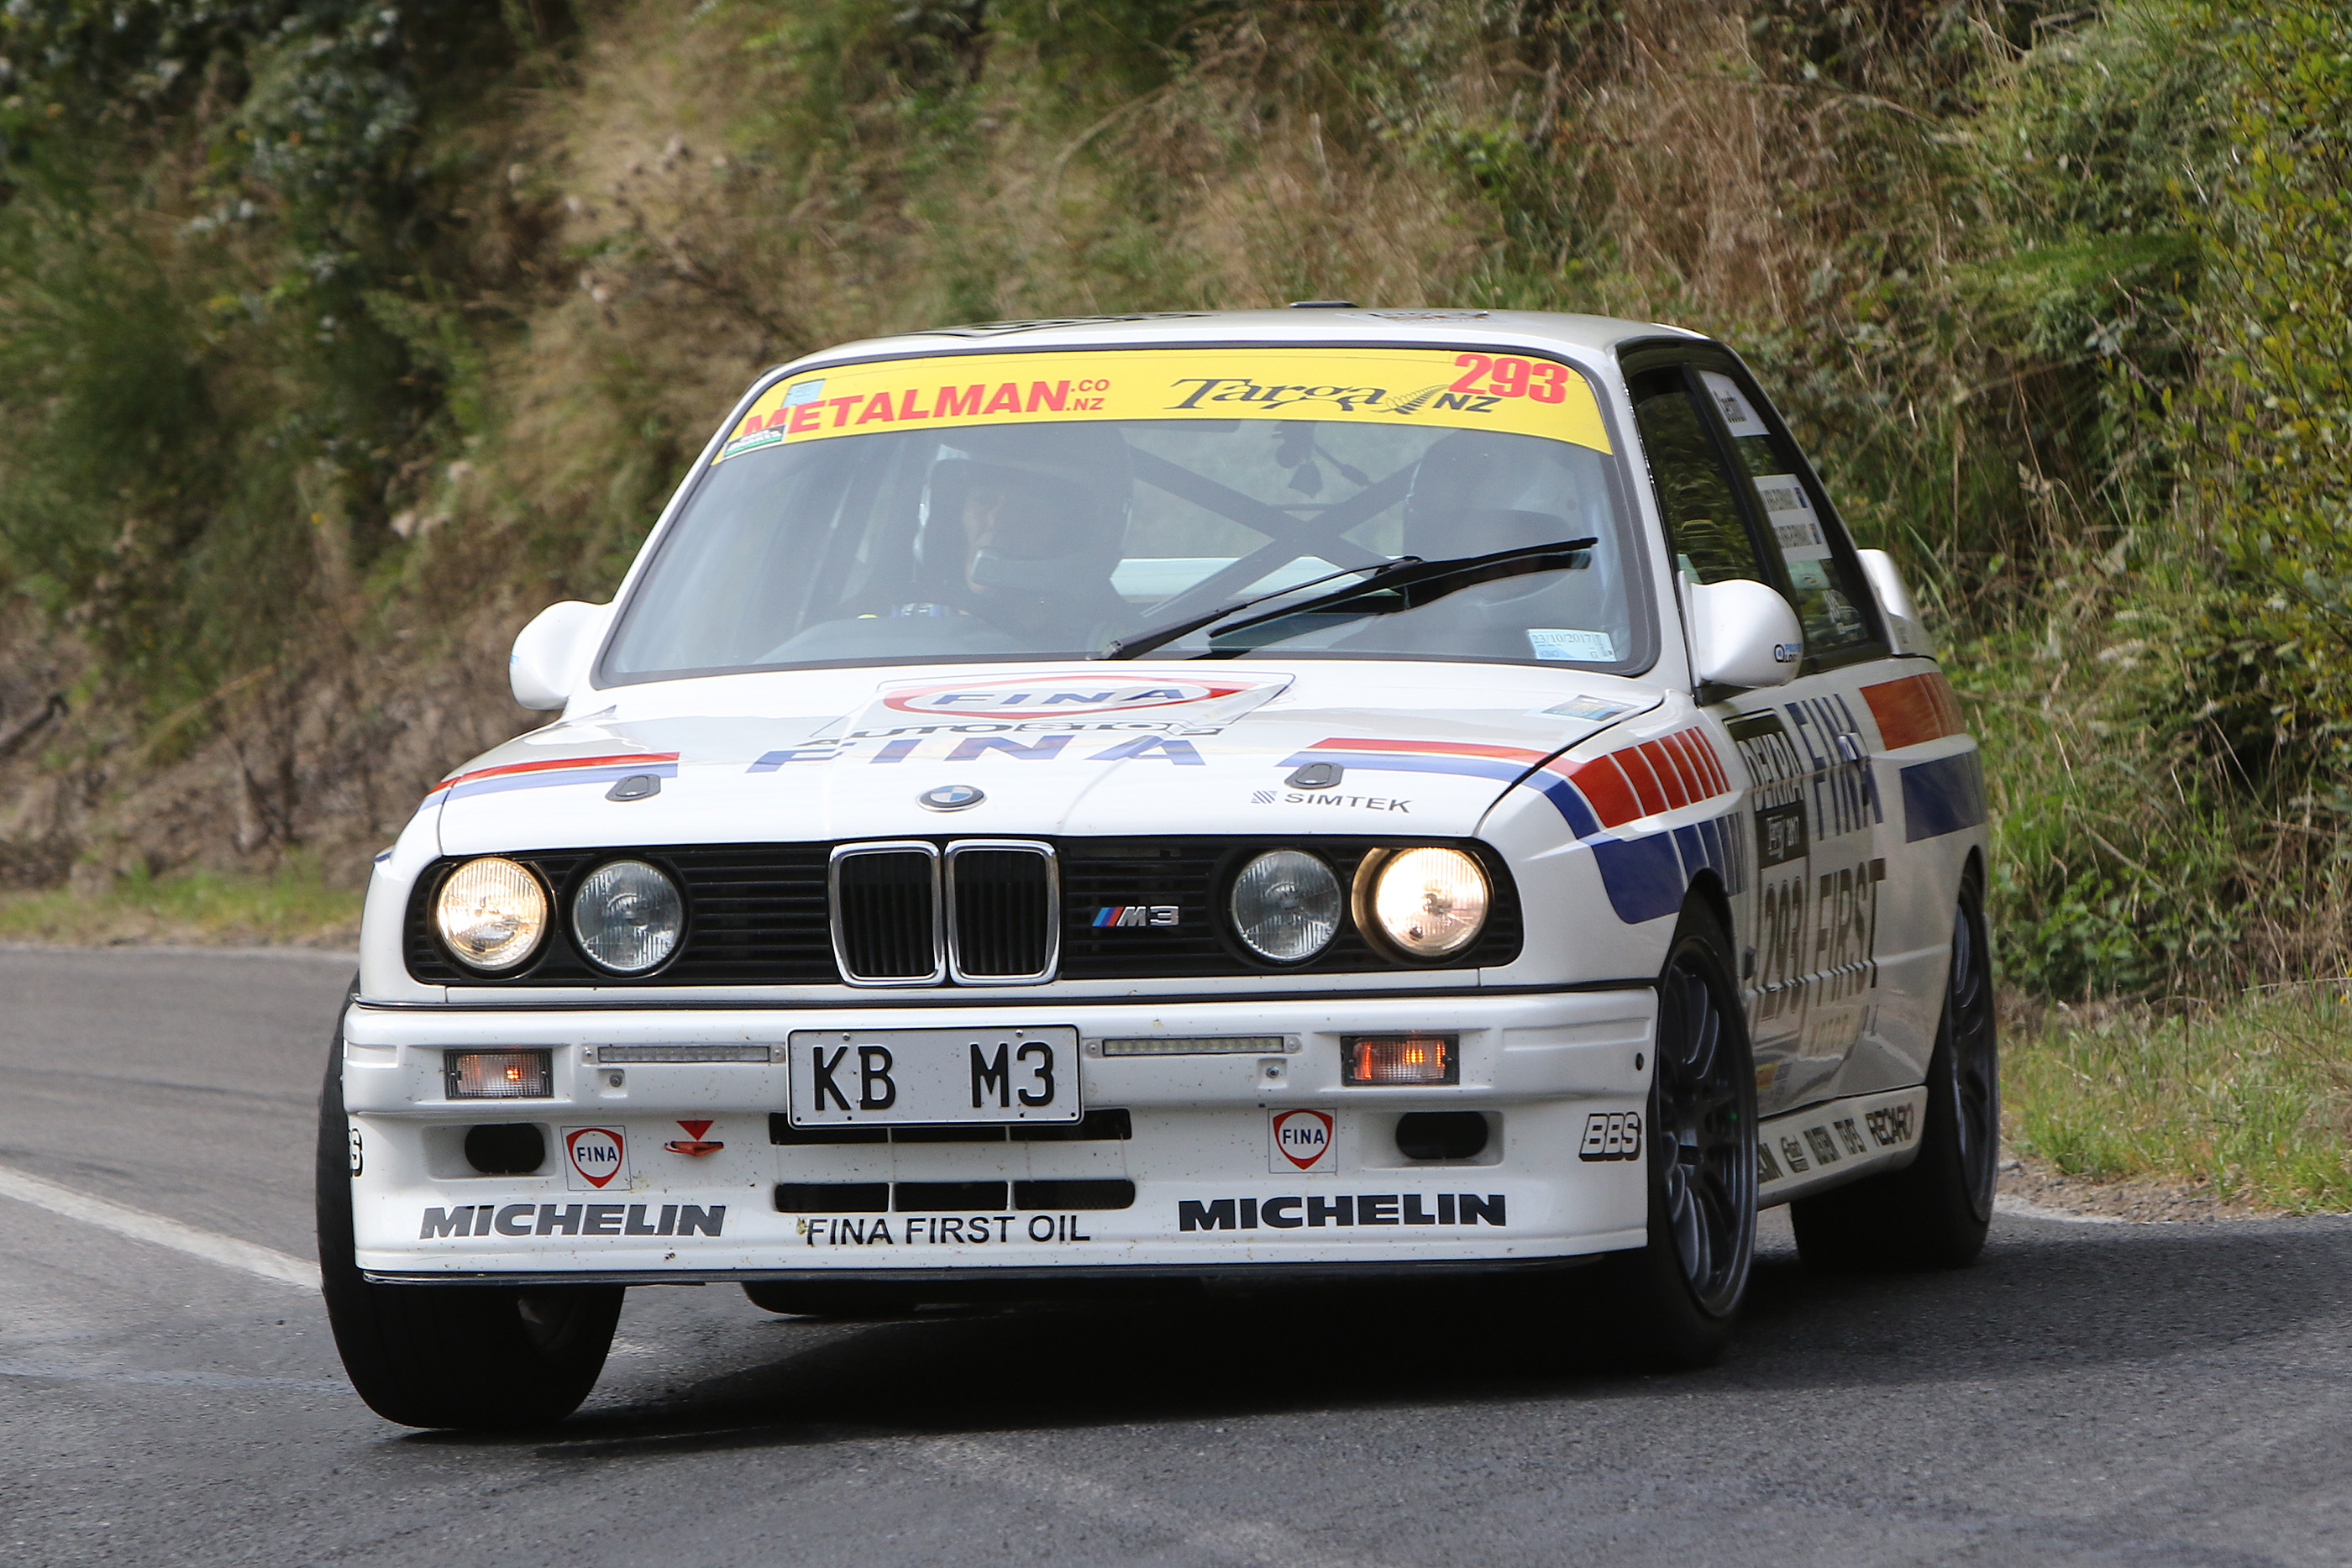 New Hawke’s Bay Event is next on Targa schedule